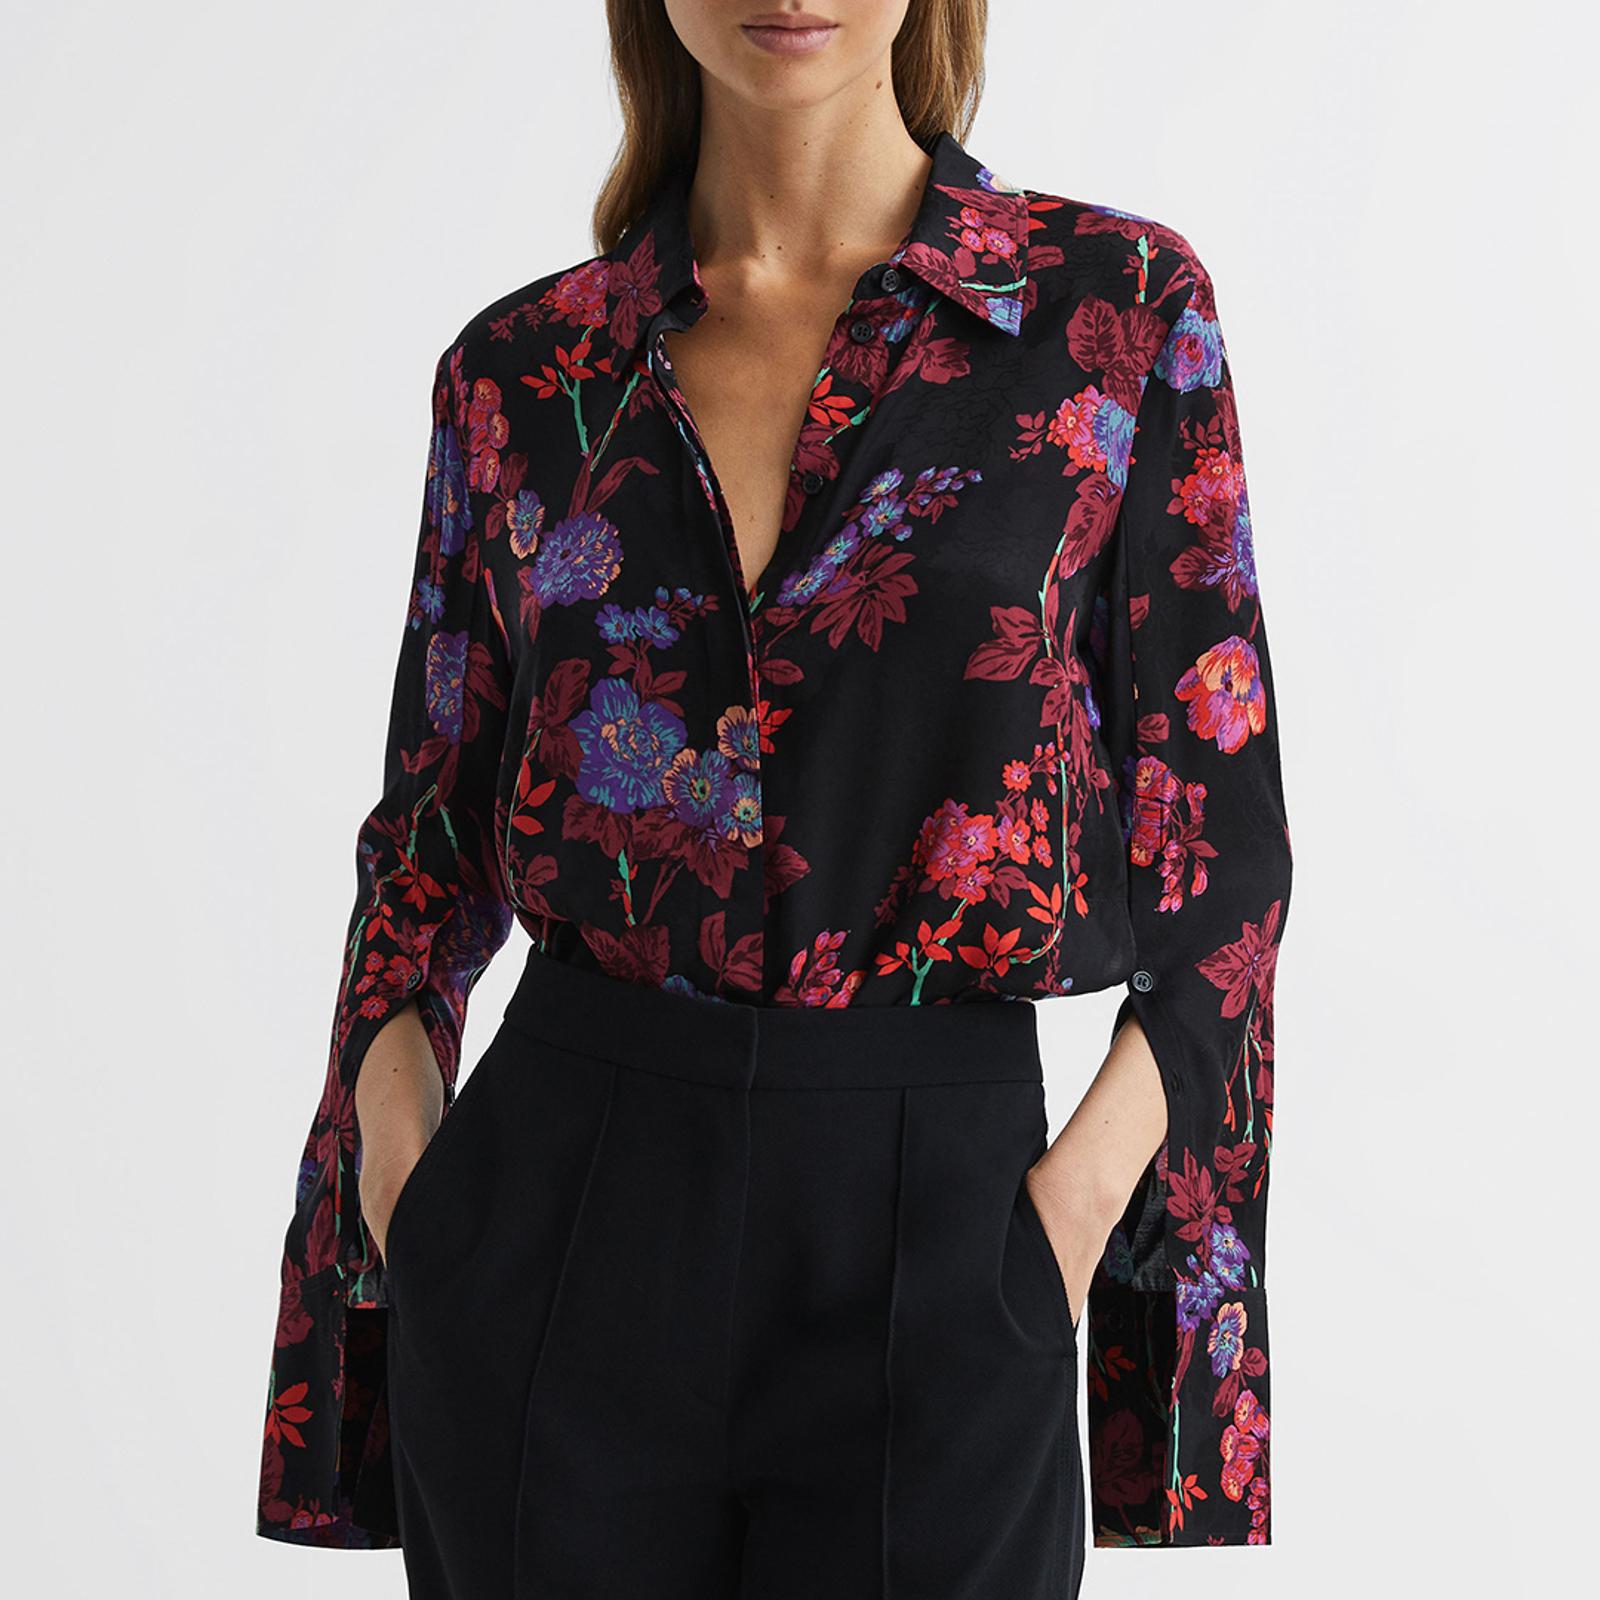 Black/Pink Polly Textured Floral Shirt - BrandAlley